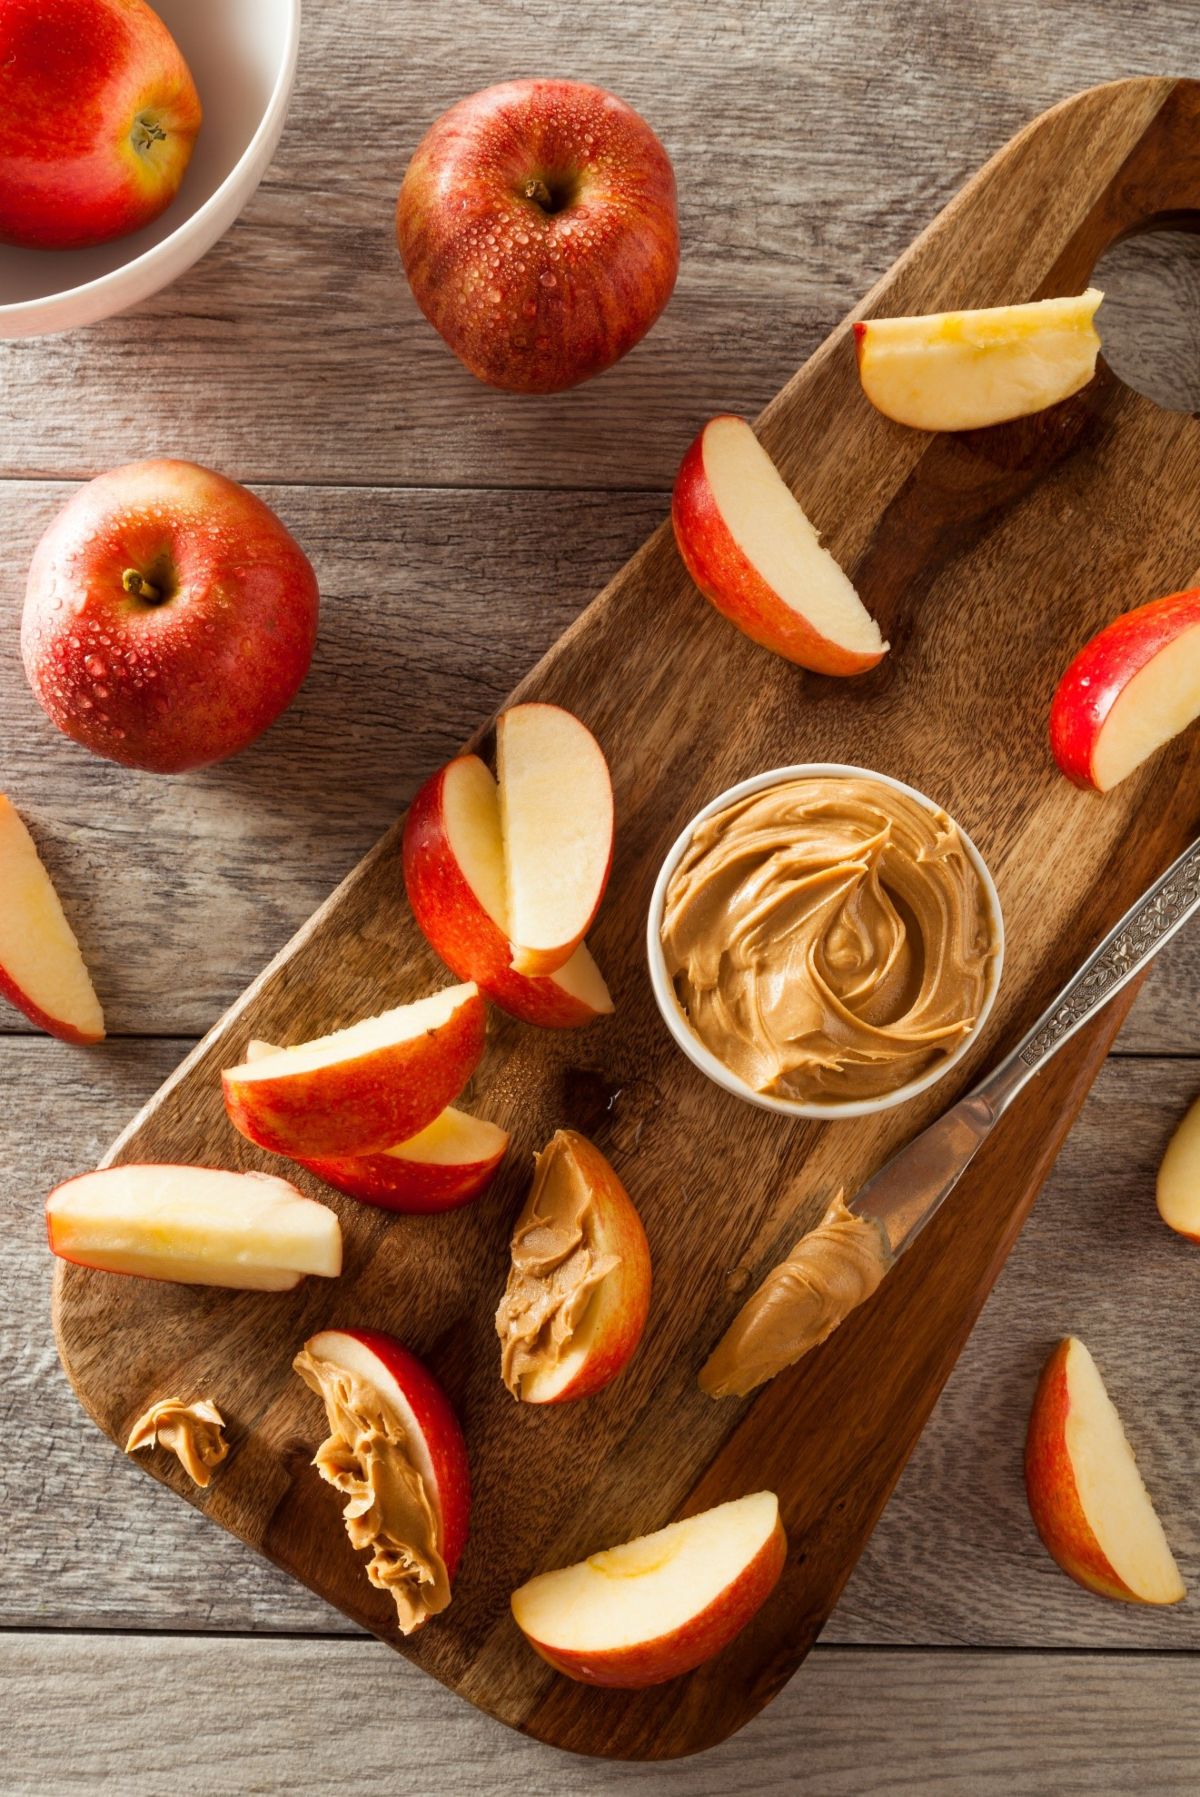 Apples and Peanut Butter